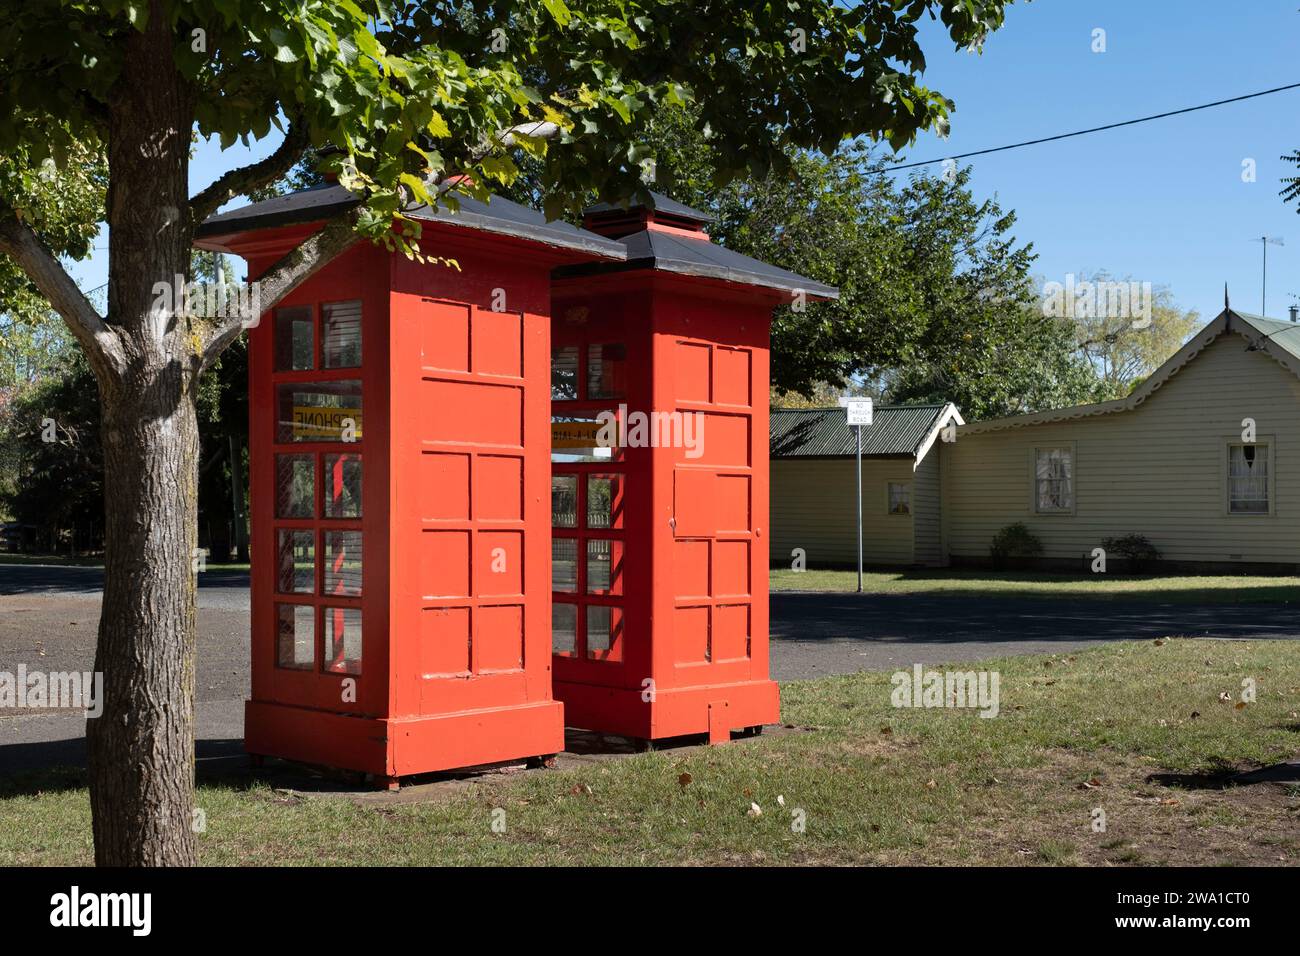 Two old-fashioned red telephone boxes side by side on lawn along a street in Ross, Tasmania Stock Photo